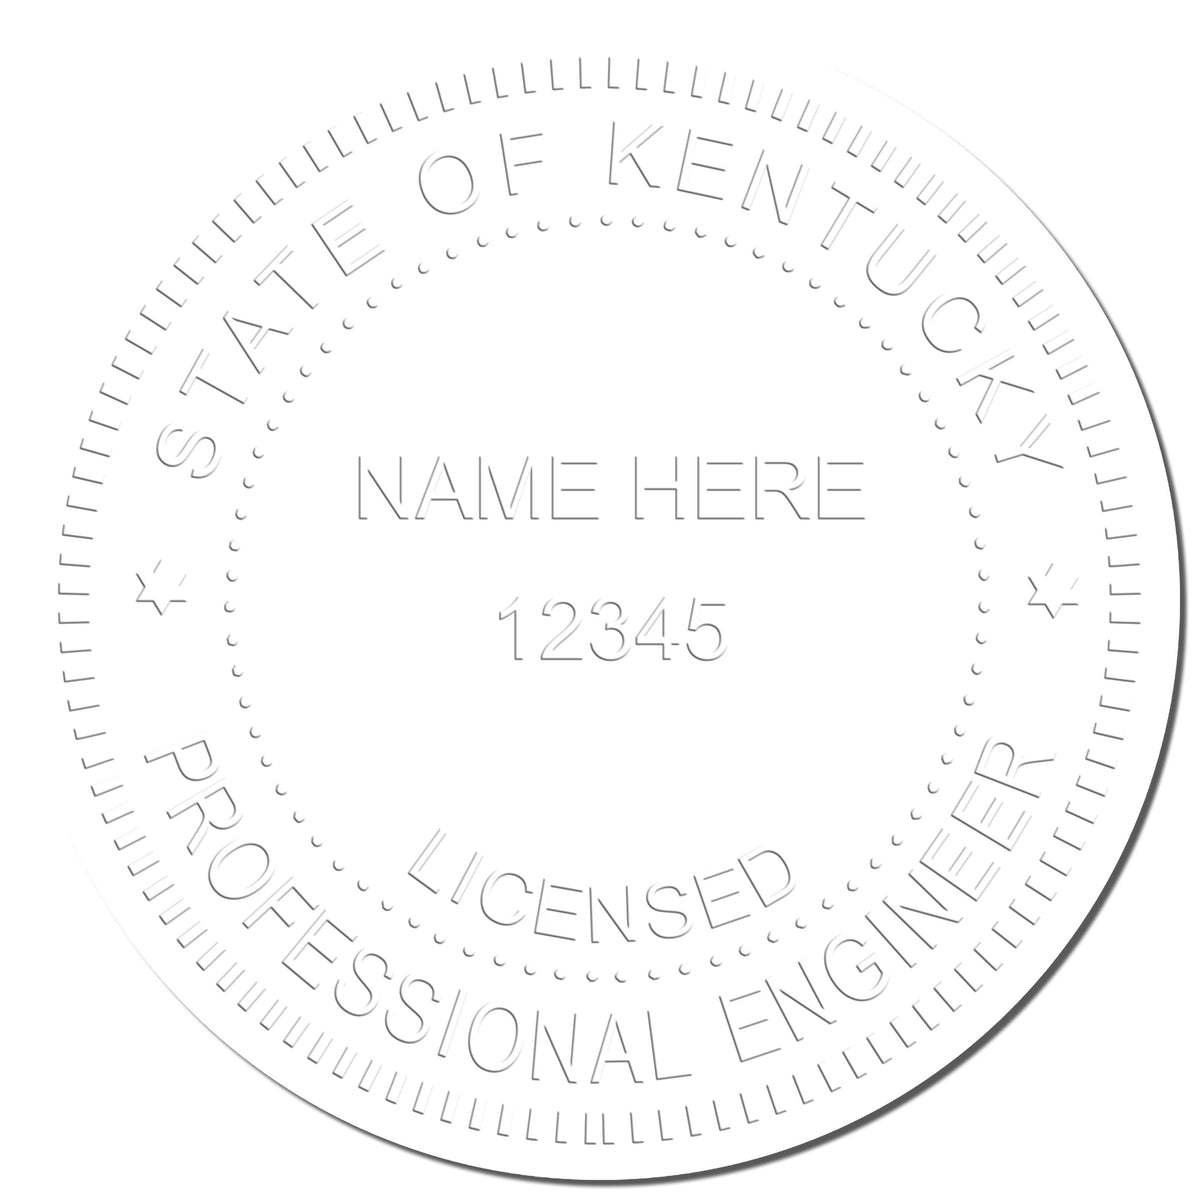 This paper is stamped with a sample imprint of the Gift Kentucky Engineer Seal, signifying its quality and reliability.